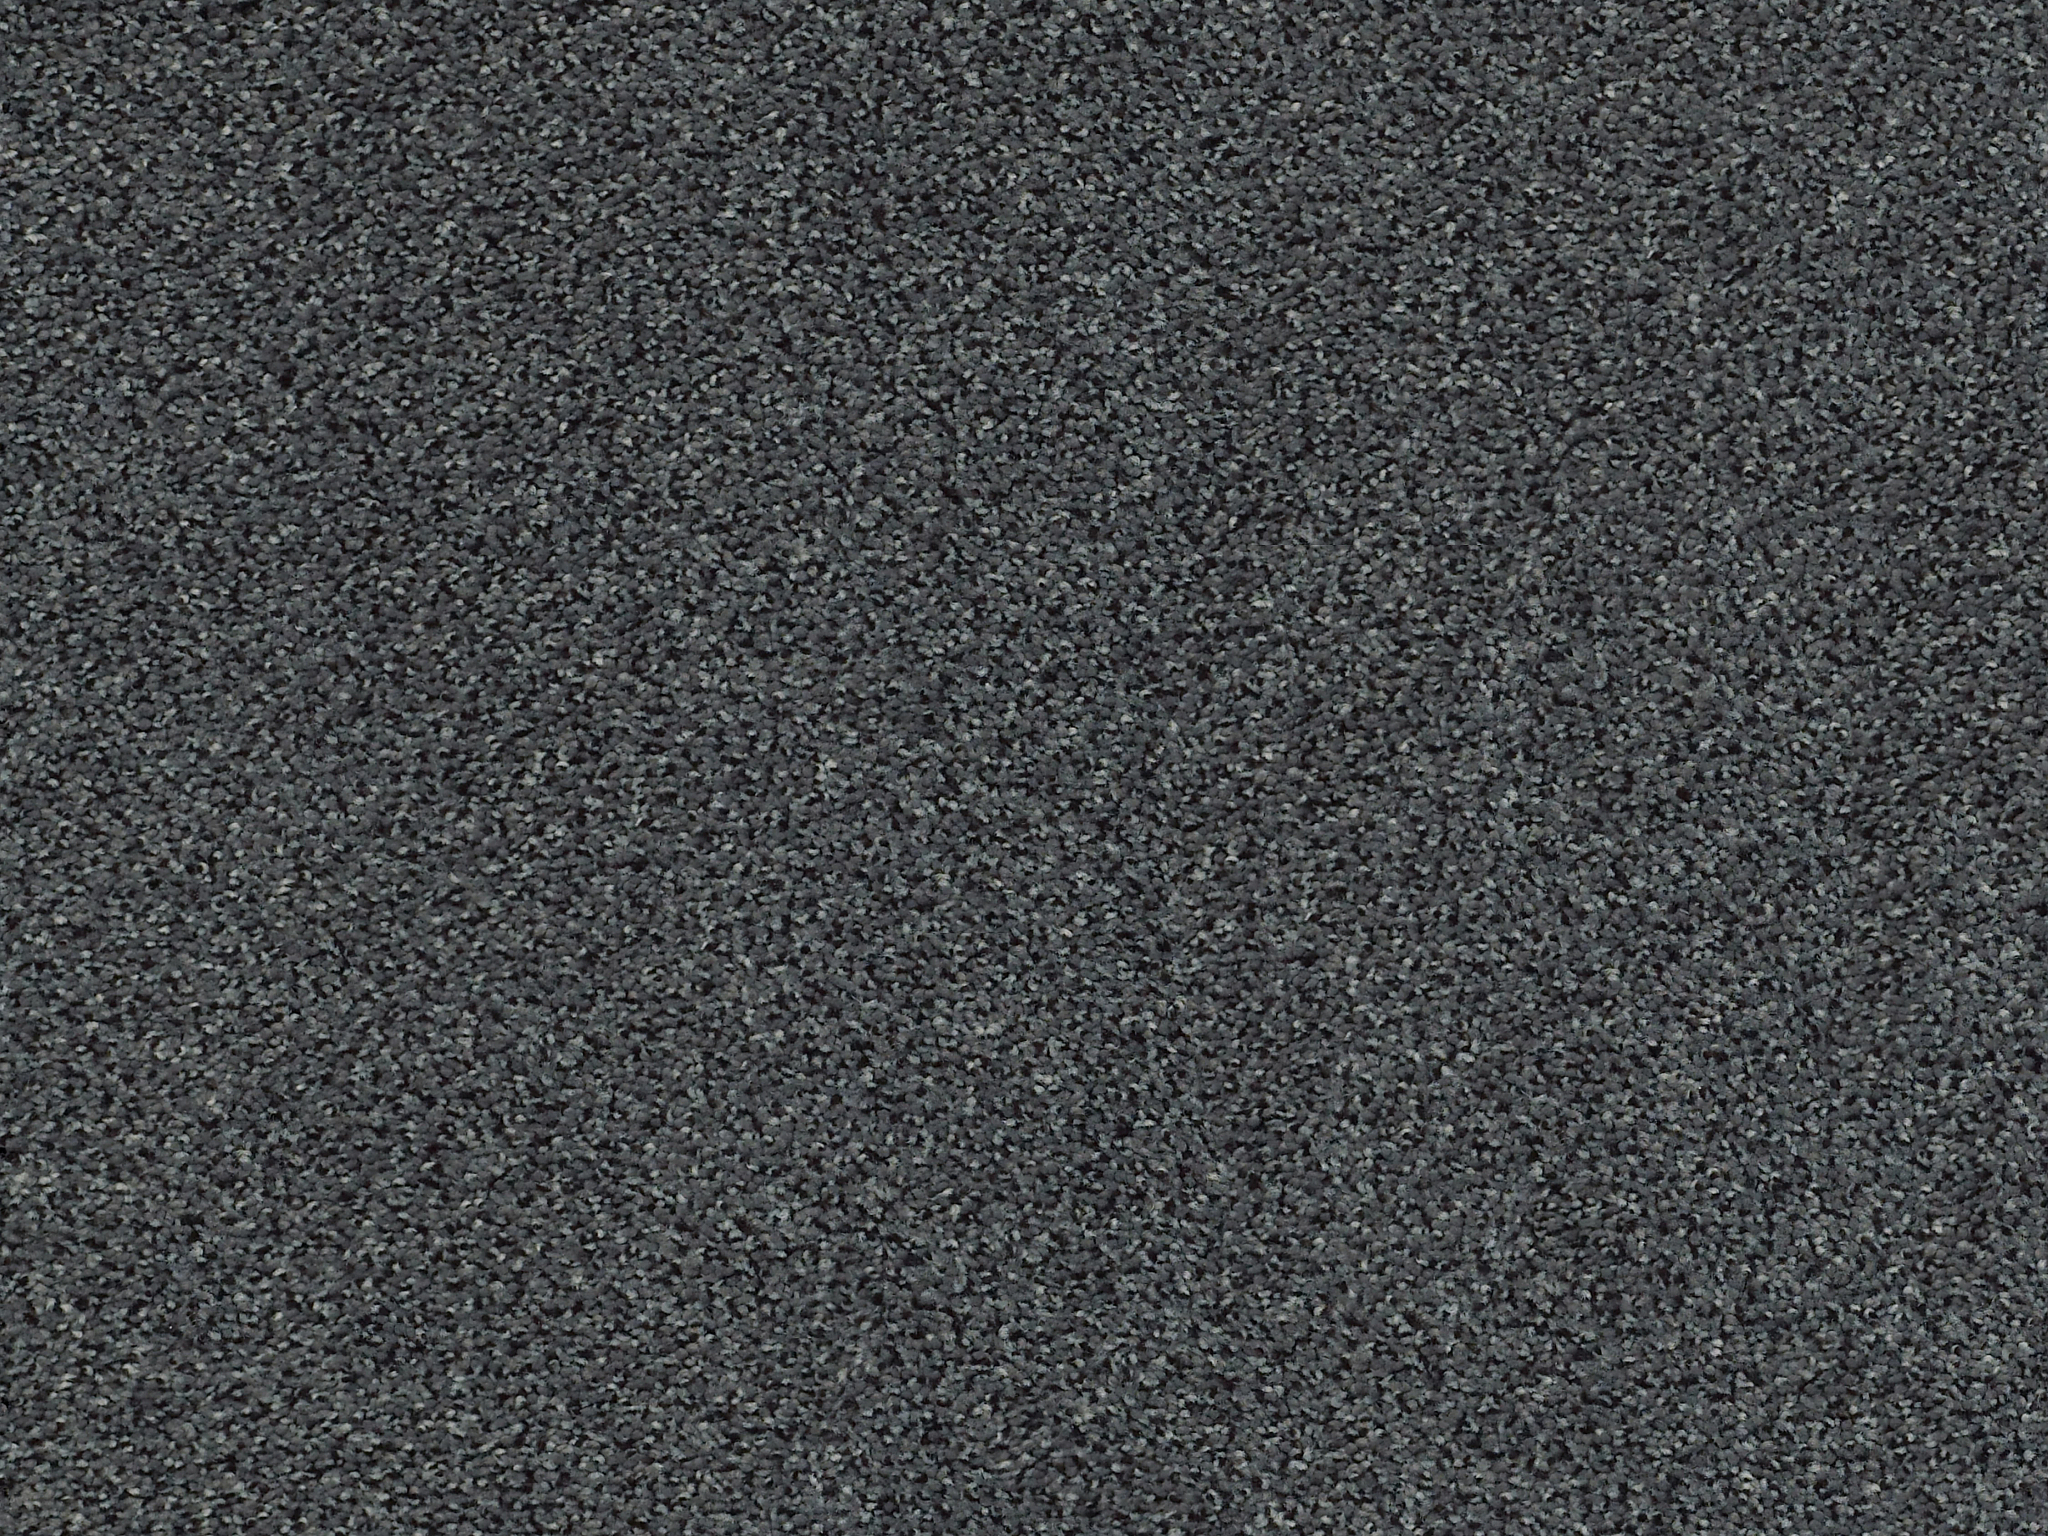 Serenity Cove Carpet - Chic Gray Zoomed Swatch Image